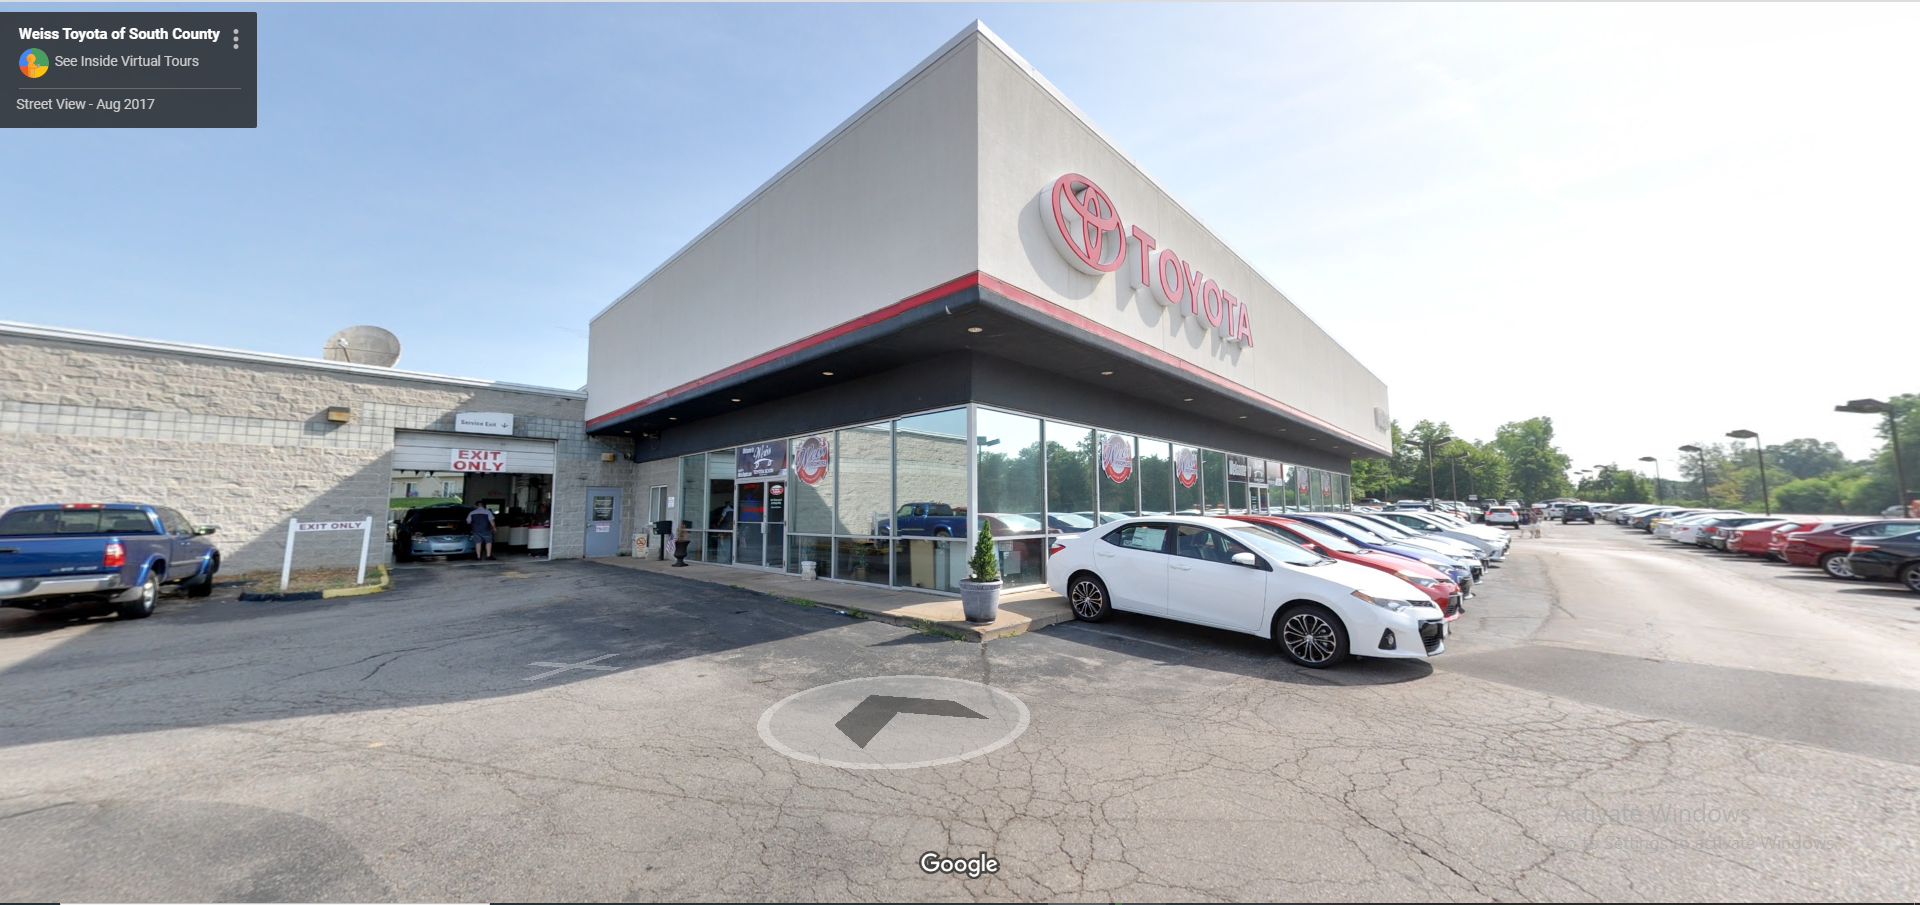 Weiss Toyota Scion of South County - St. Louis